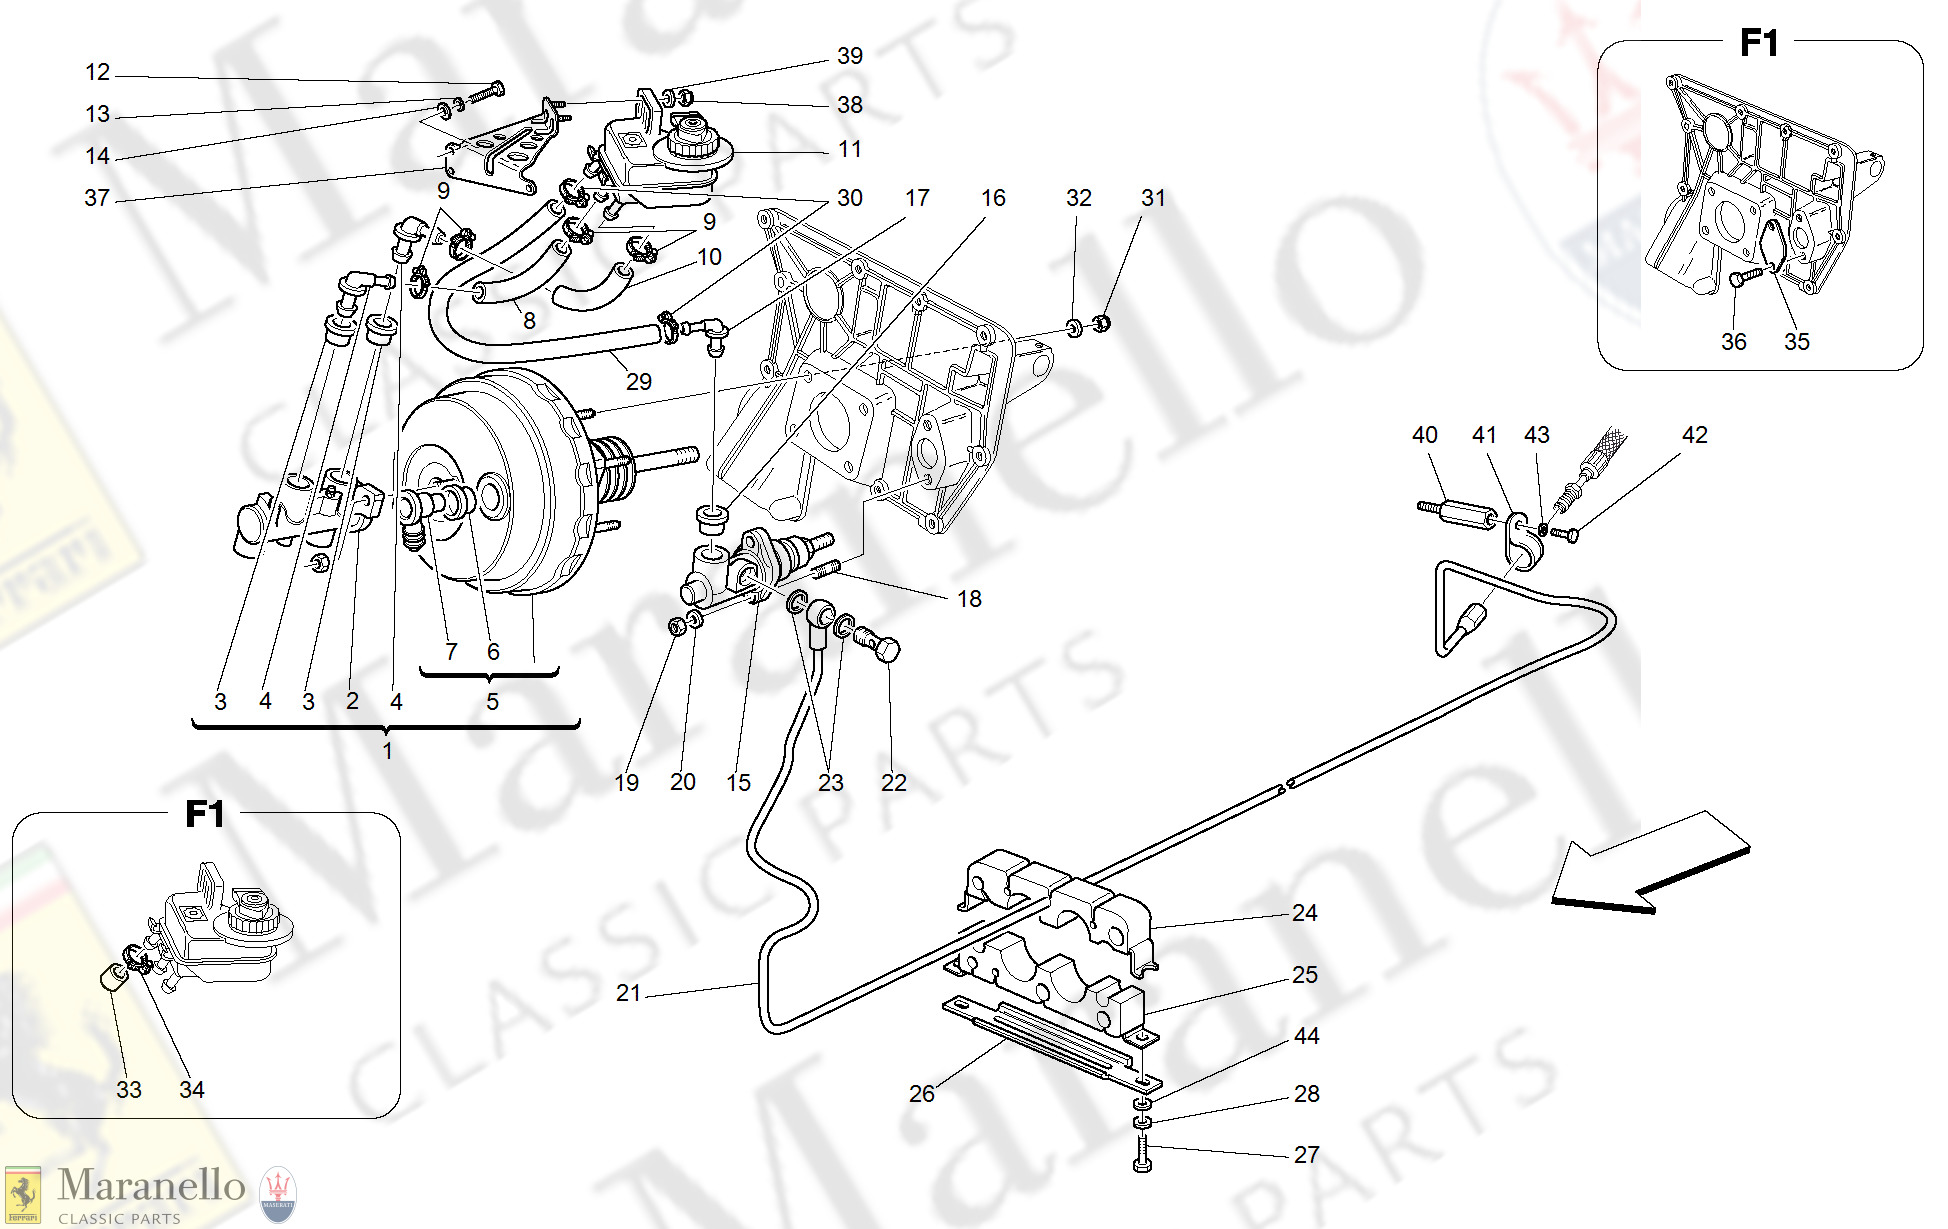 040 - Brakes And Clutch Hydraulic Controls -Valid For Gd-